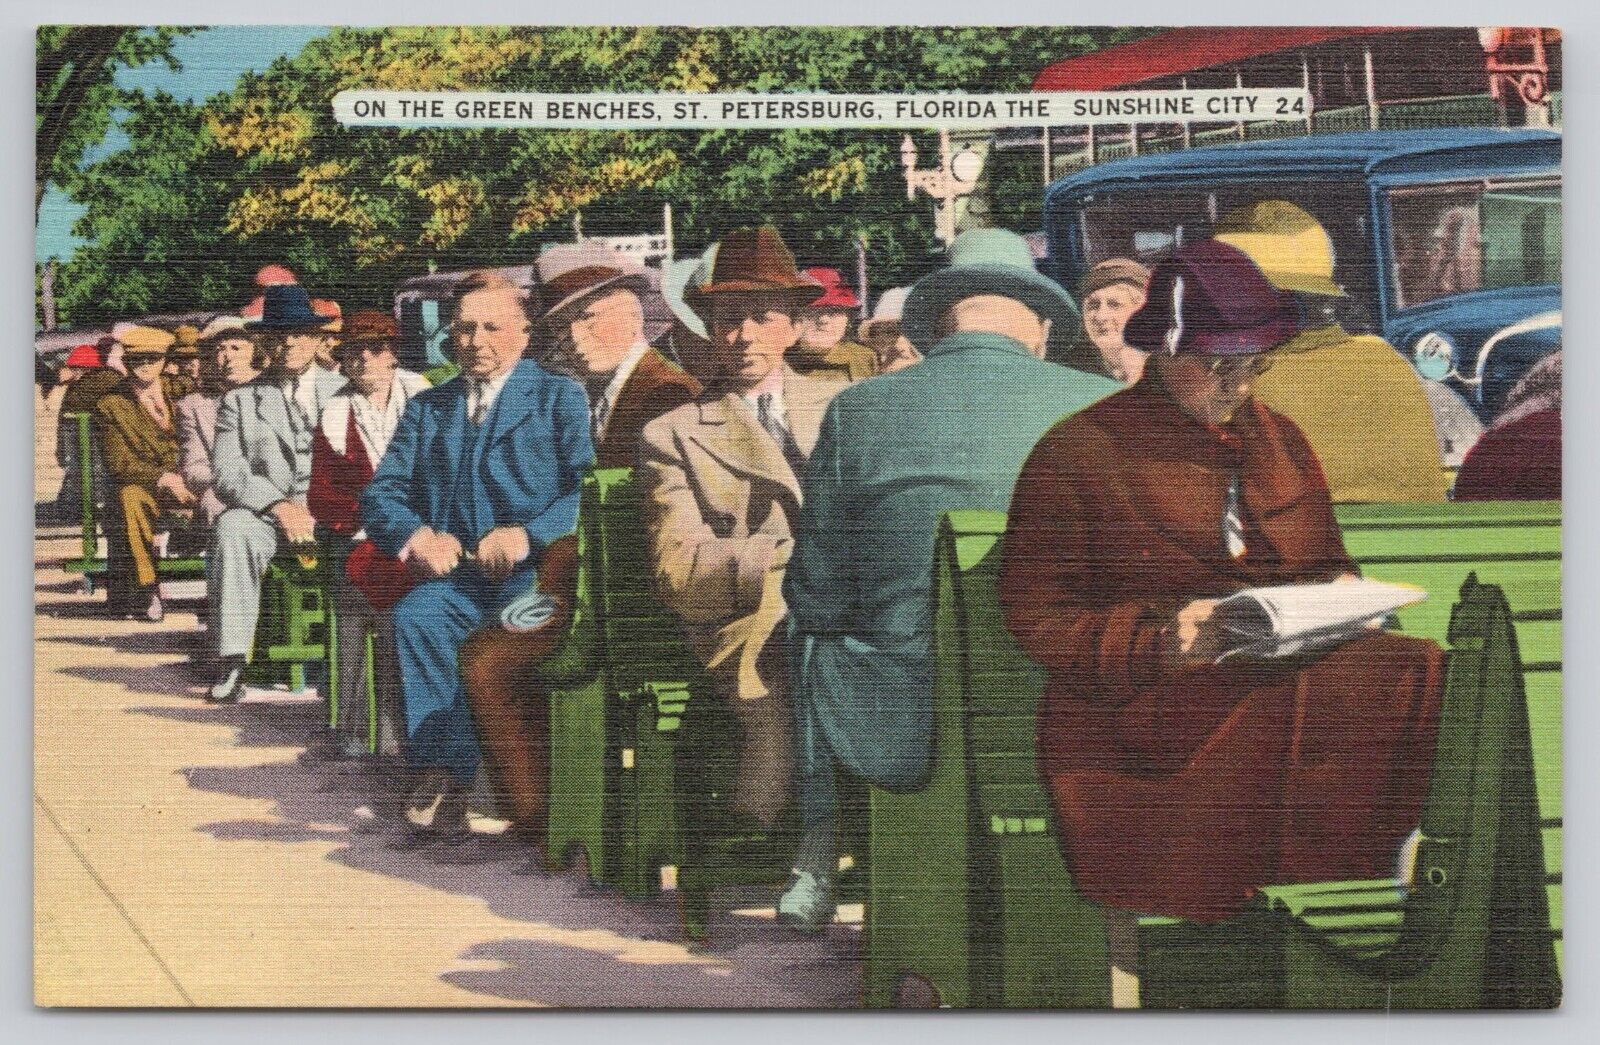 St Petersburg Florida FL, People Sitting on the Famous Green Benches Postcard